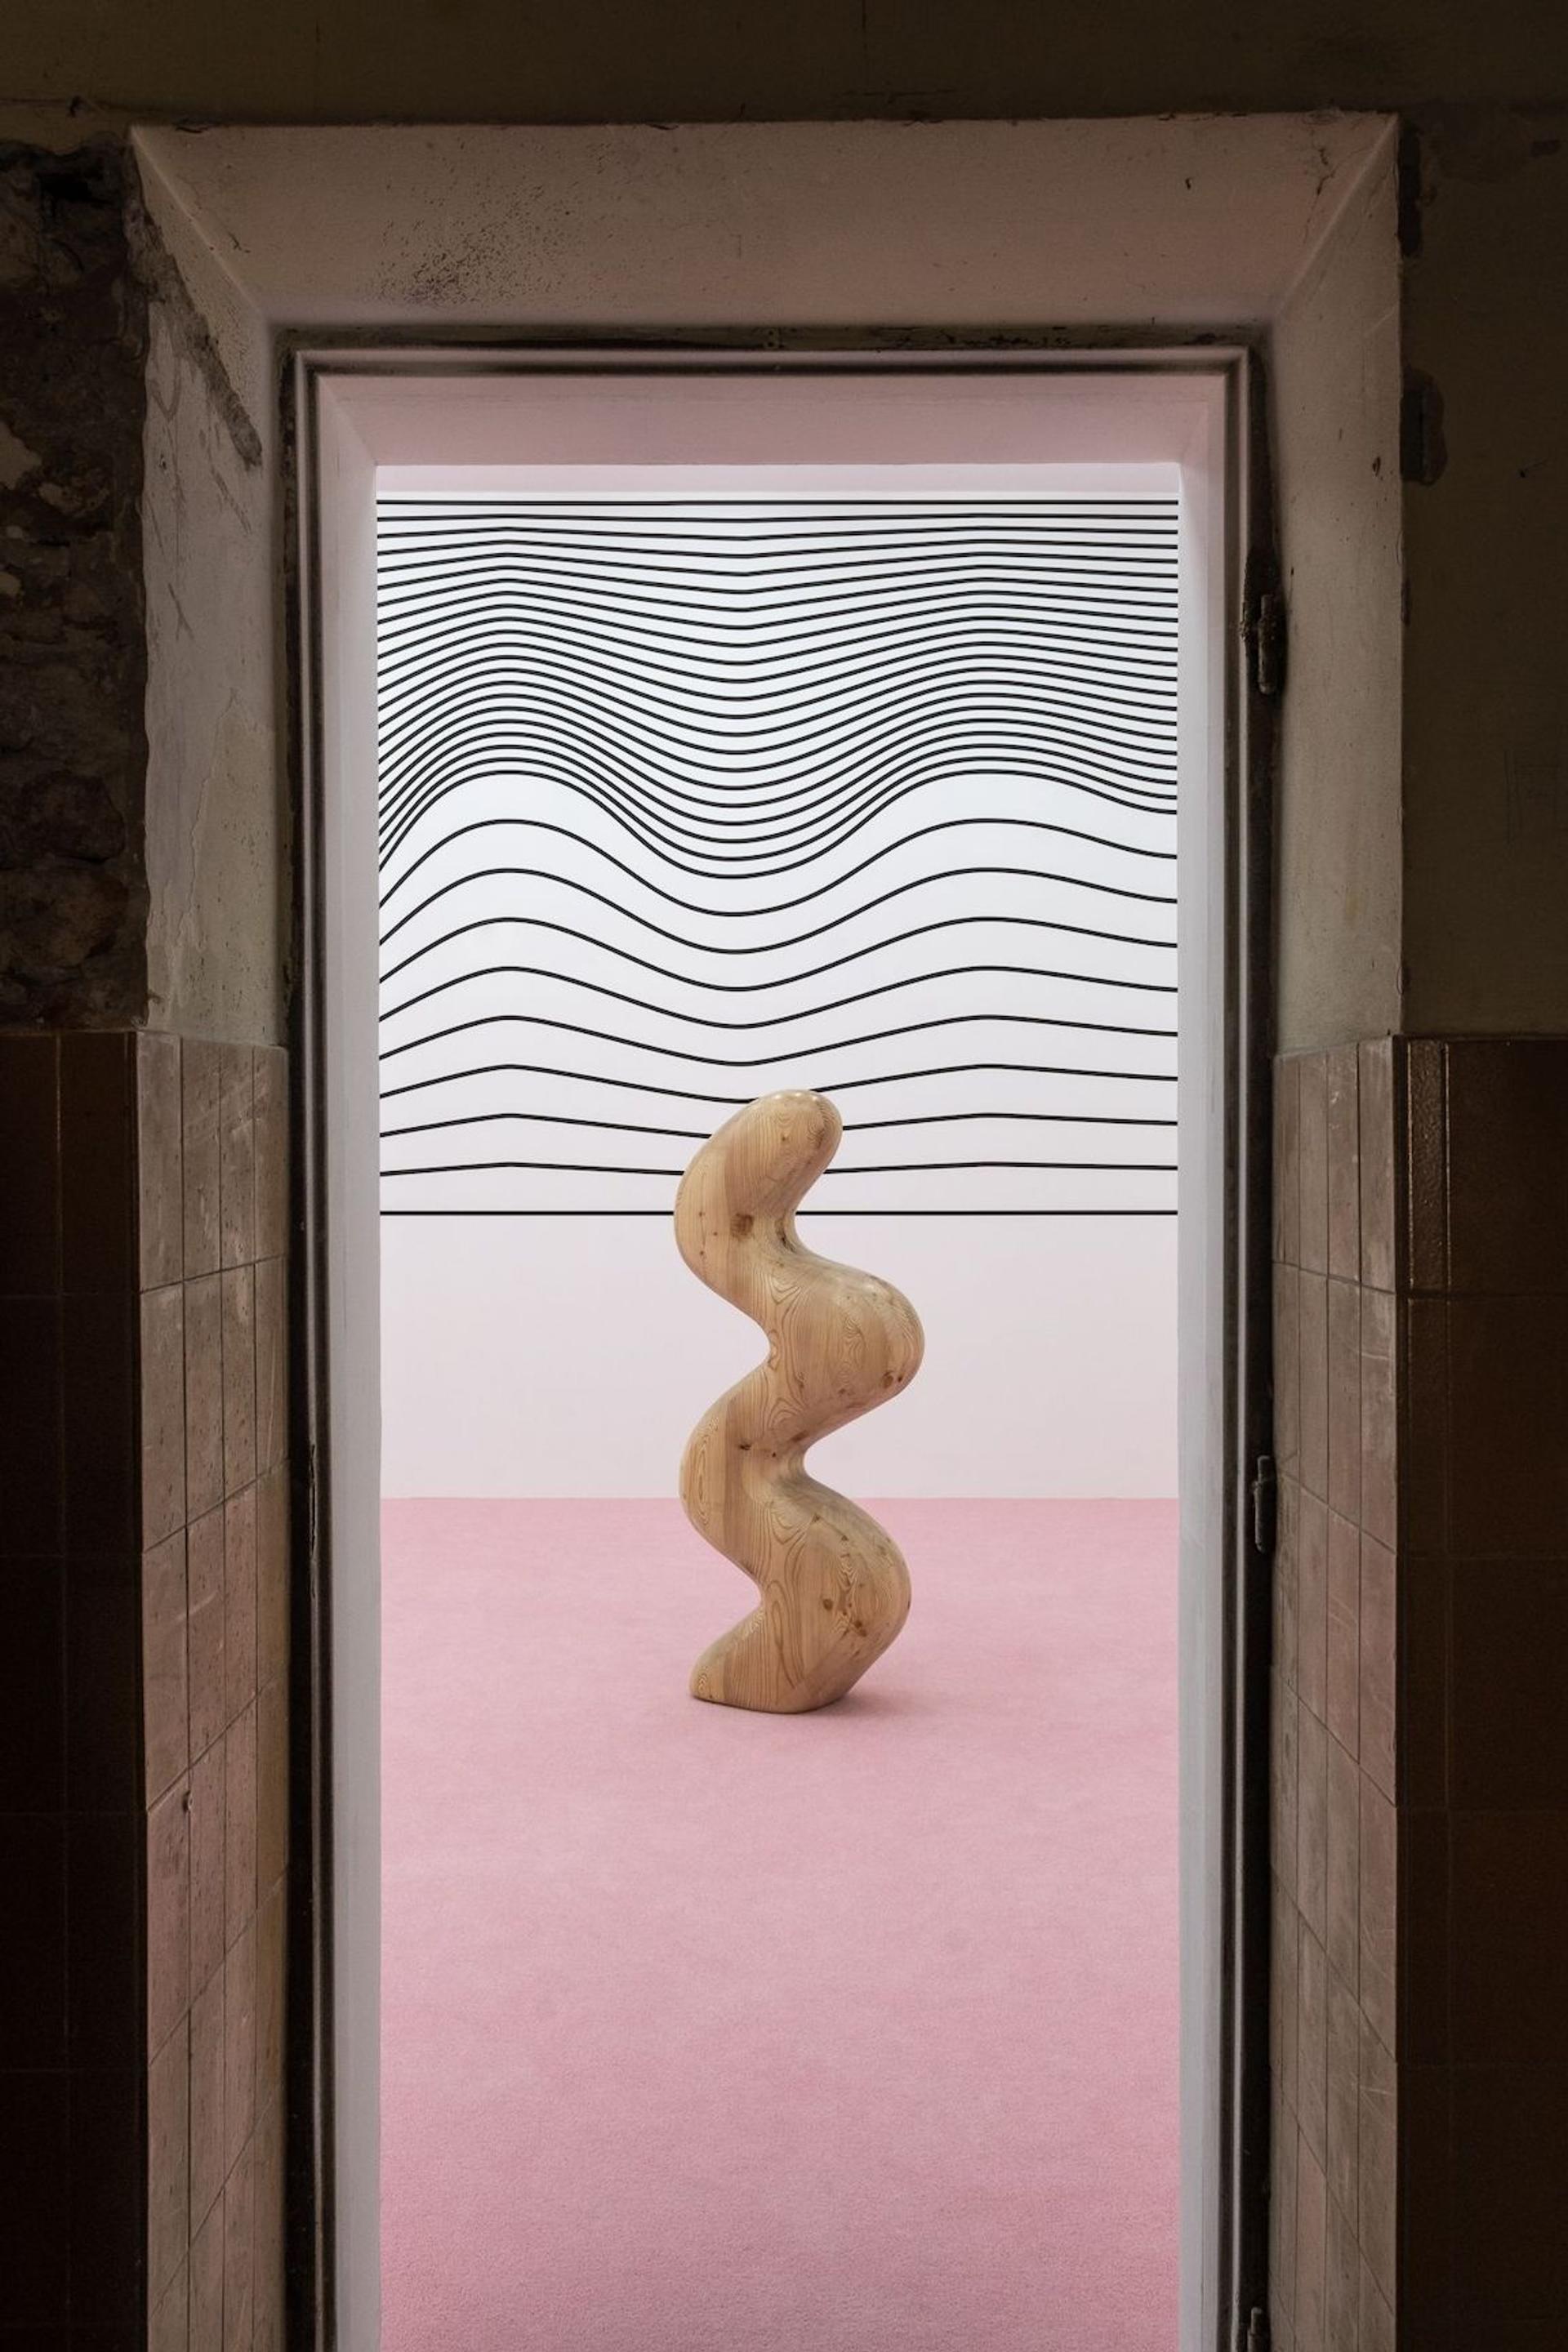 Claudia Comte, Heatwave and Melting Snake, 2021. Courtesy of the artist and Gladstone Gallery, New York/Brussels, and König Galerie, Berlin/London